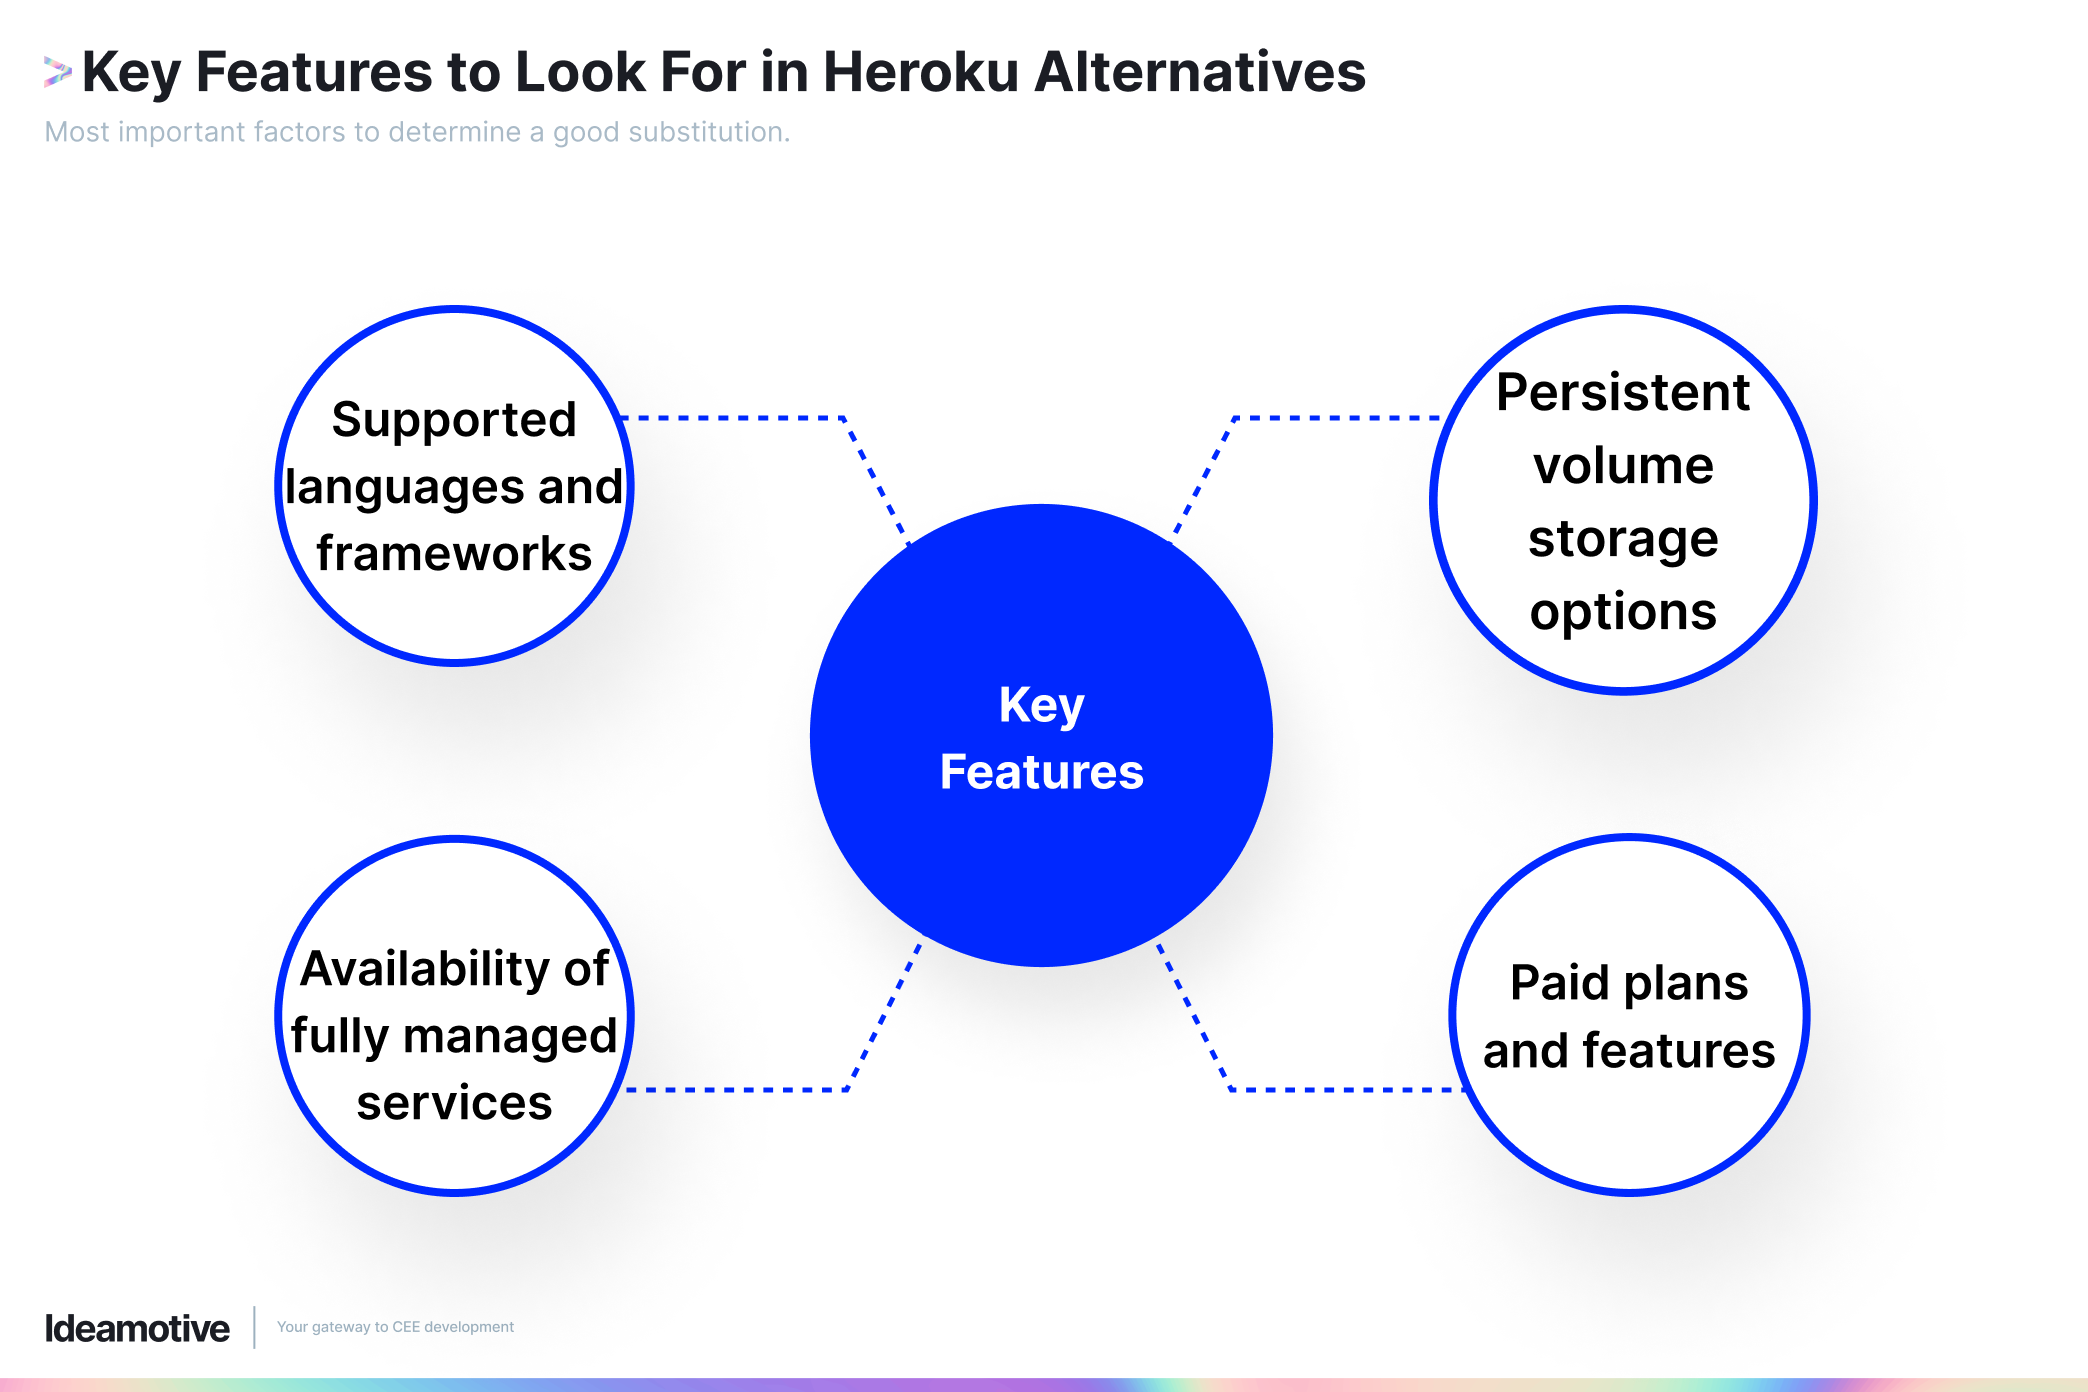 Key Features to Look For in Heroku Alternatives